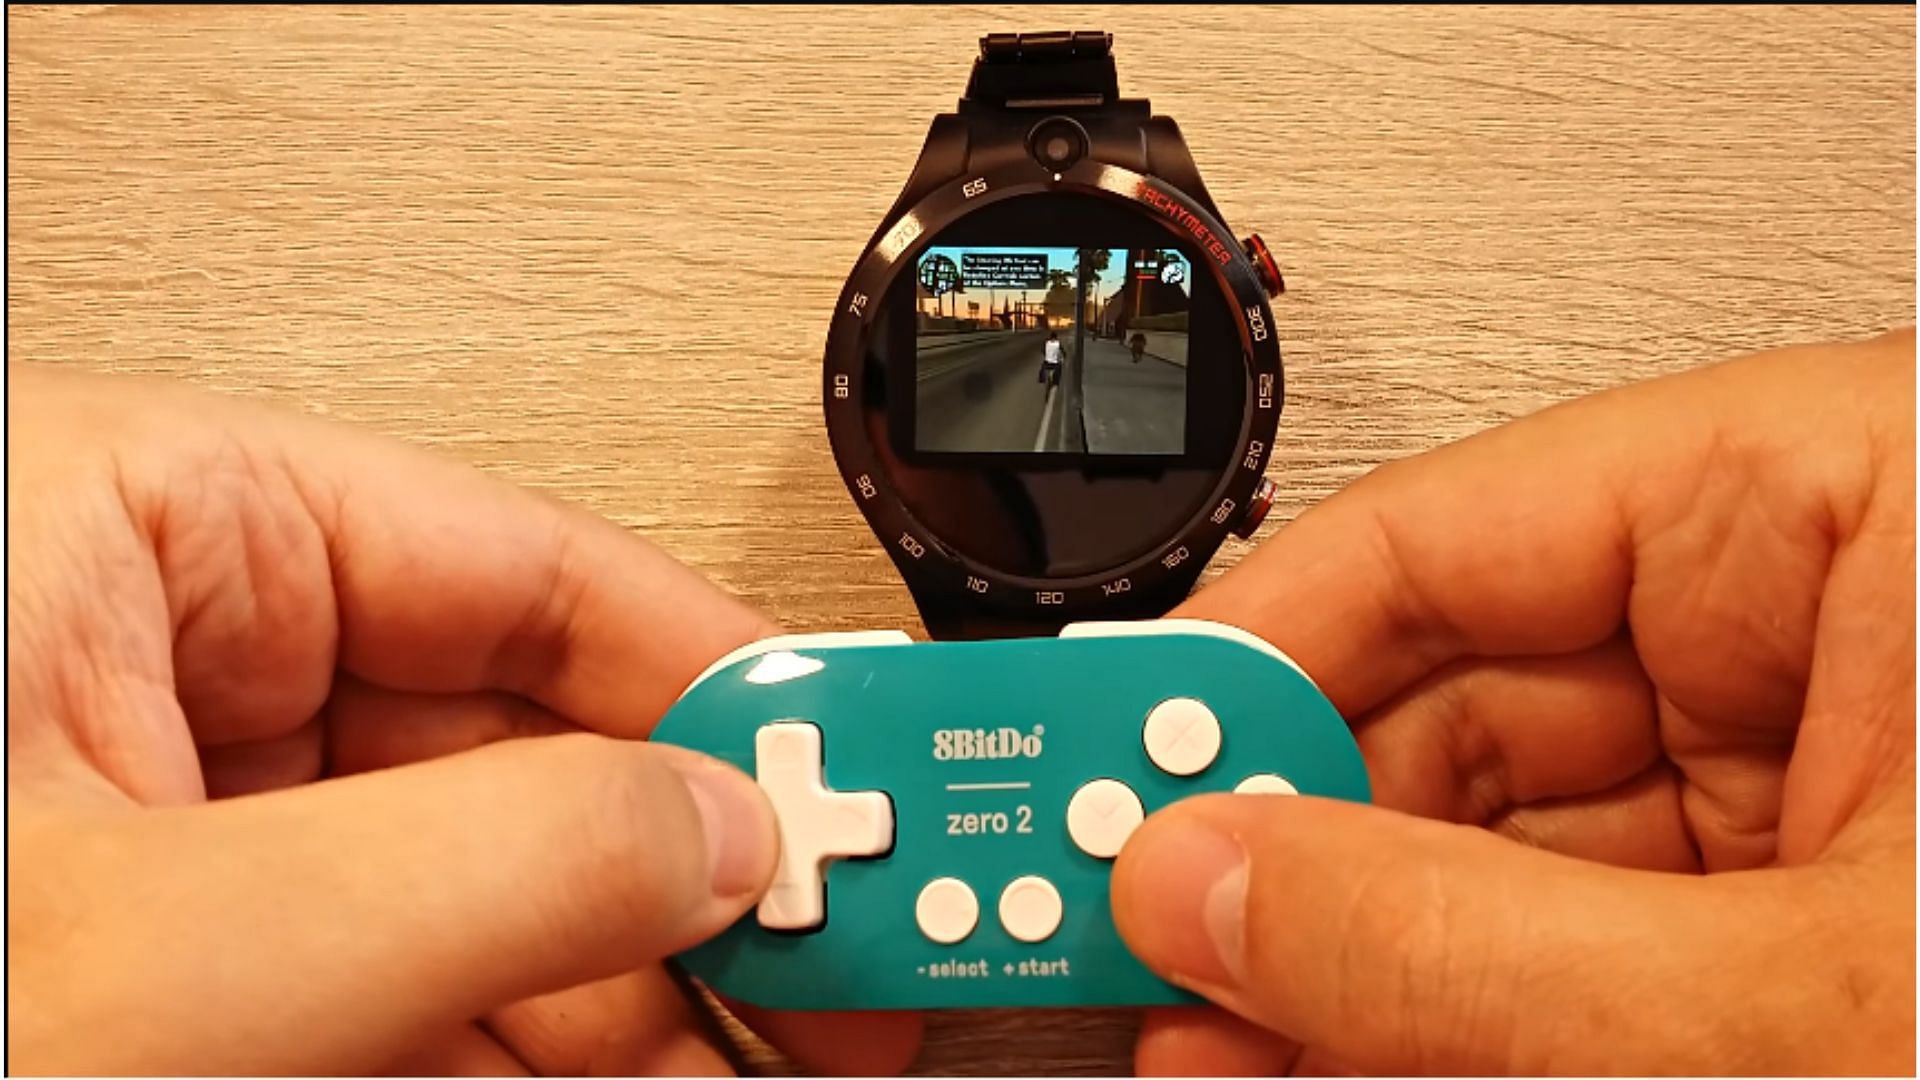 GTA San Andreas running on a smartwatch (Image via YouTube/Full Android Smartwatch)